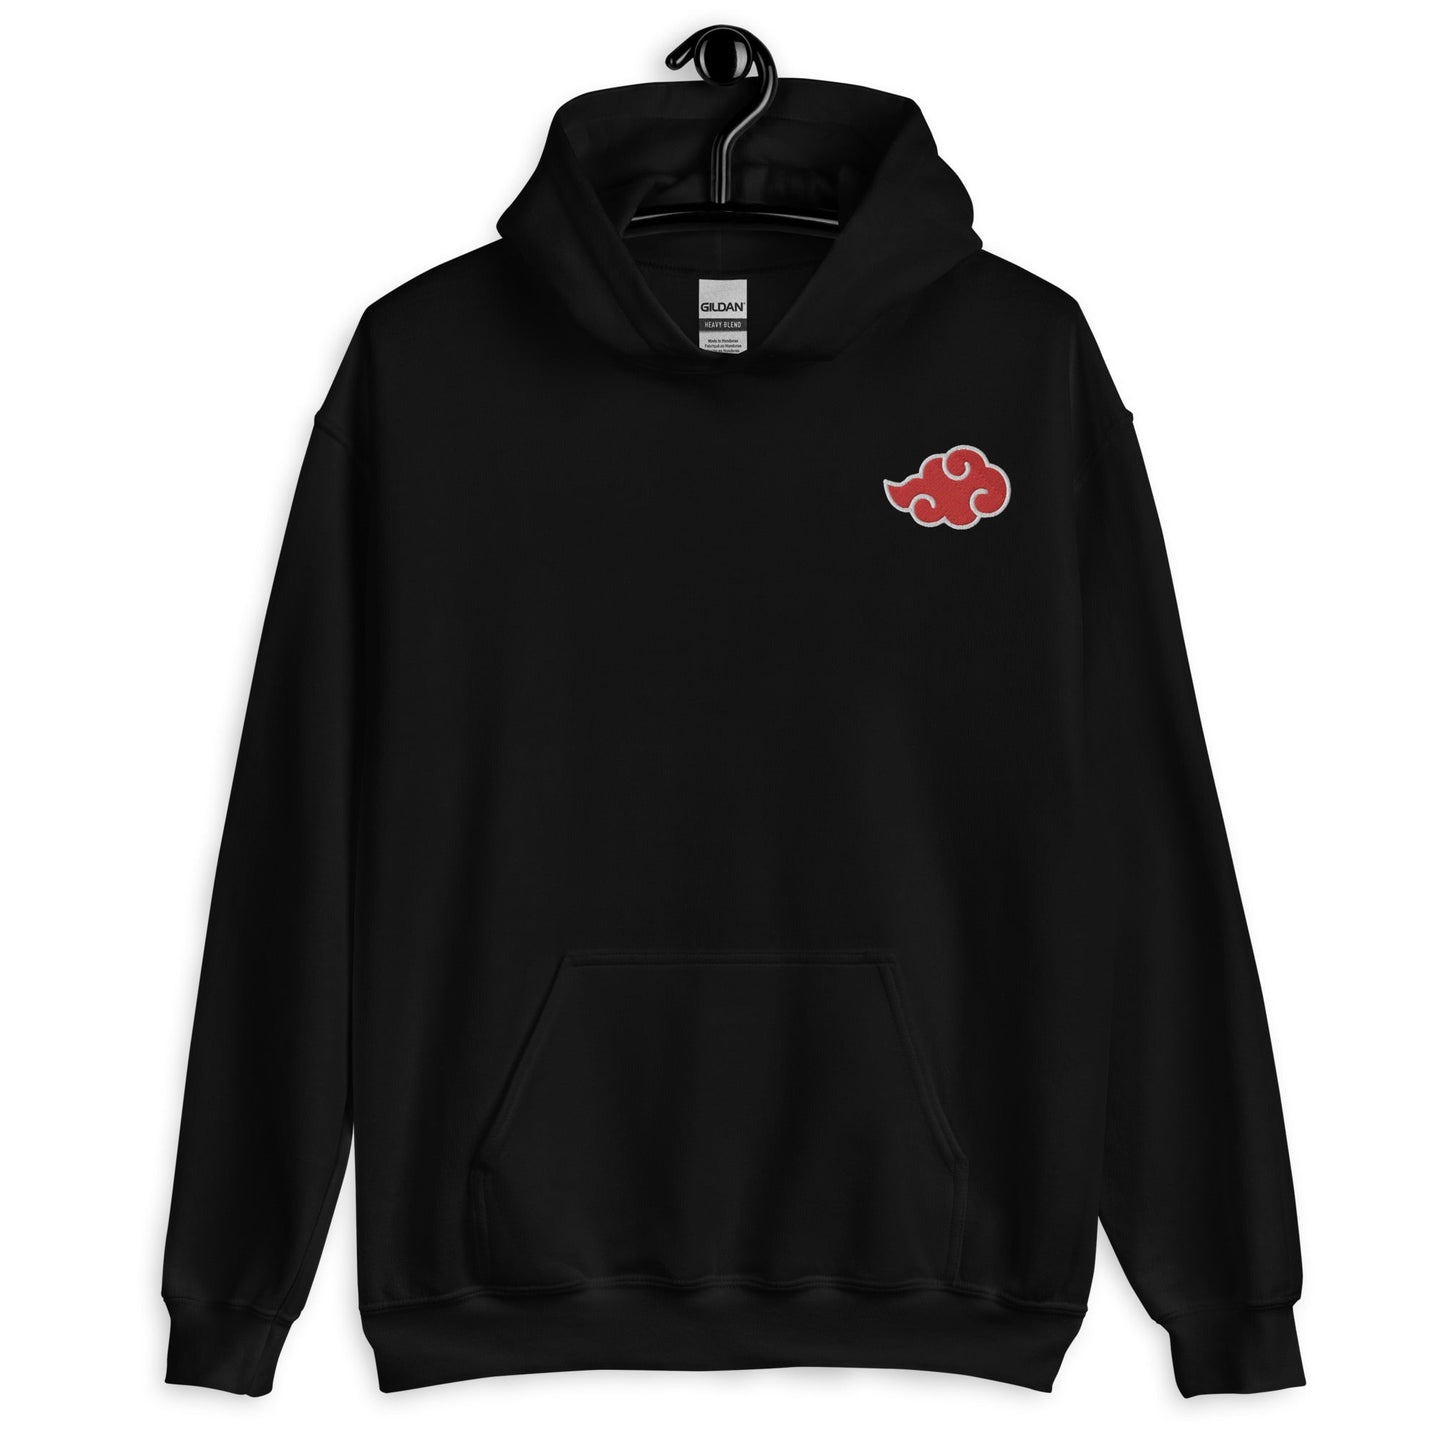 Embroidered Akatsuki Cloud Logo Naruto Anime Embroidered Hoodie - One Punch Fits